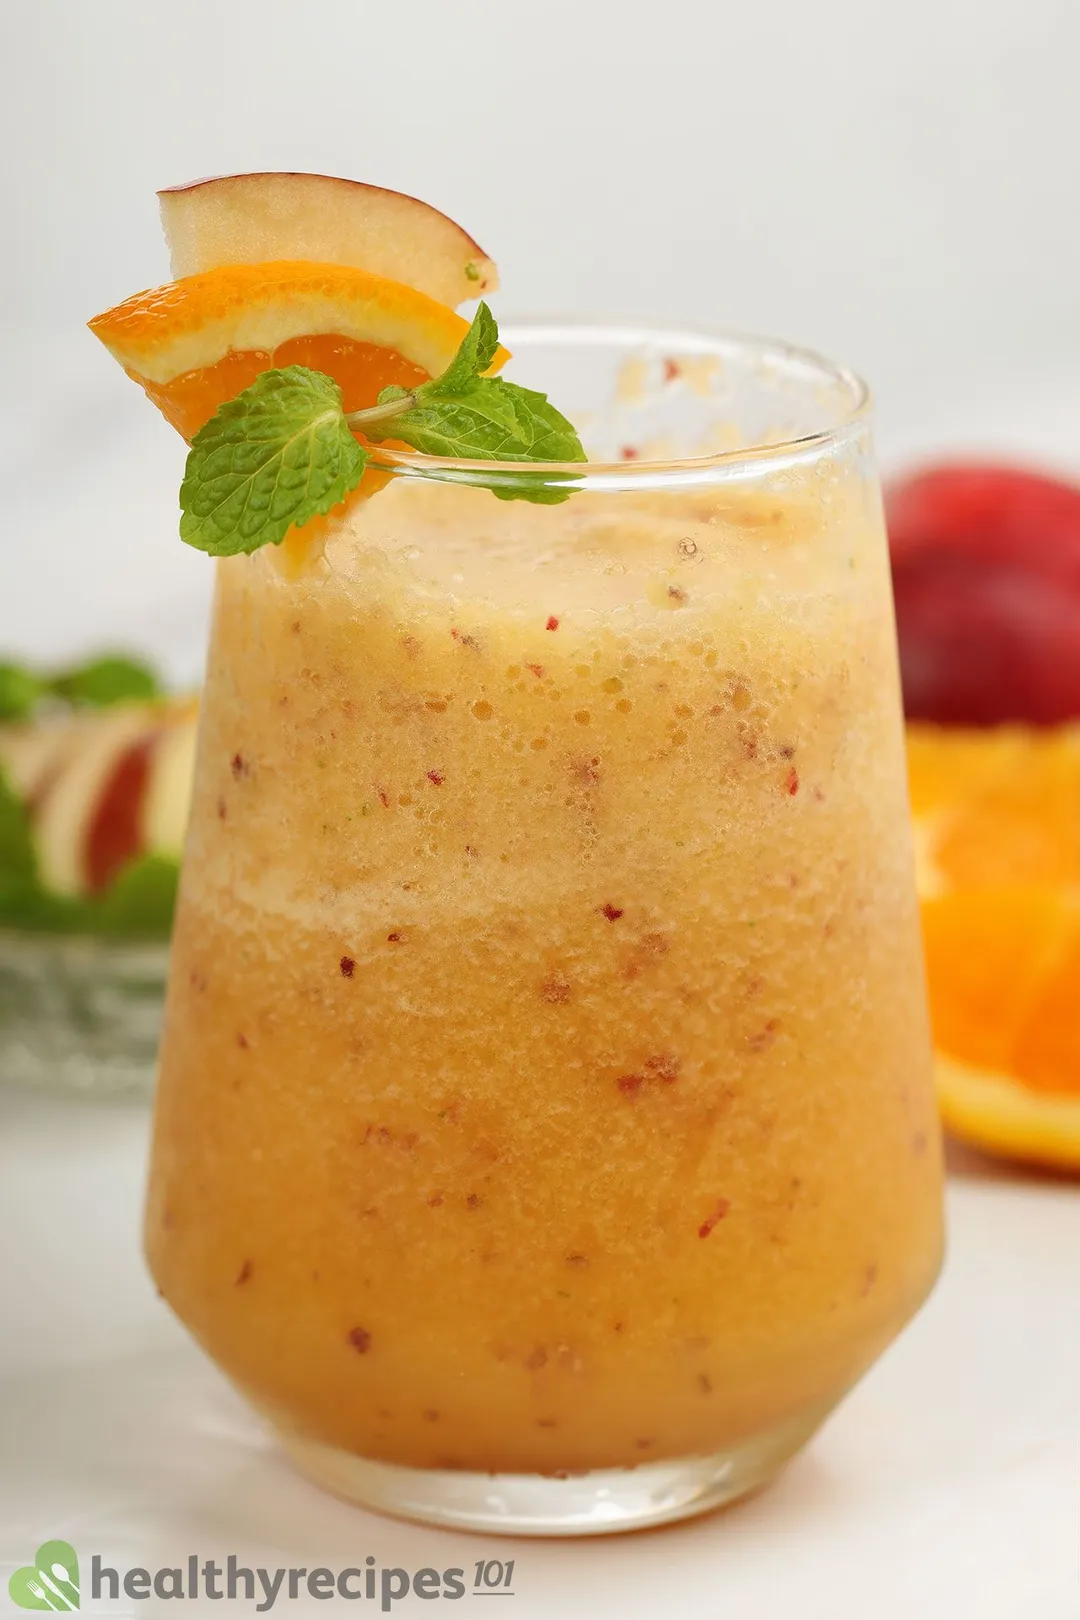 A glass of apple orange smoothie garnished with a small slice of orange, a mint julep, and a small slice of apple.